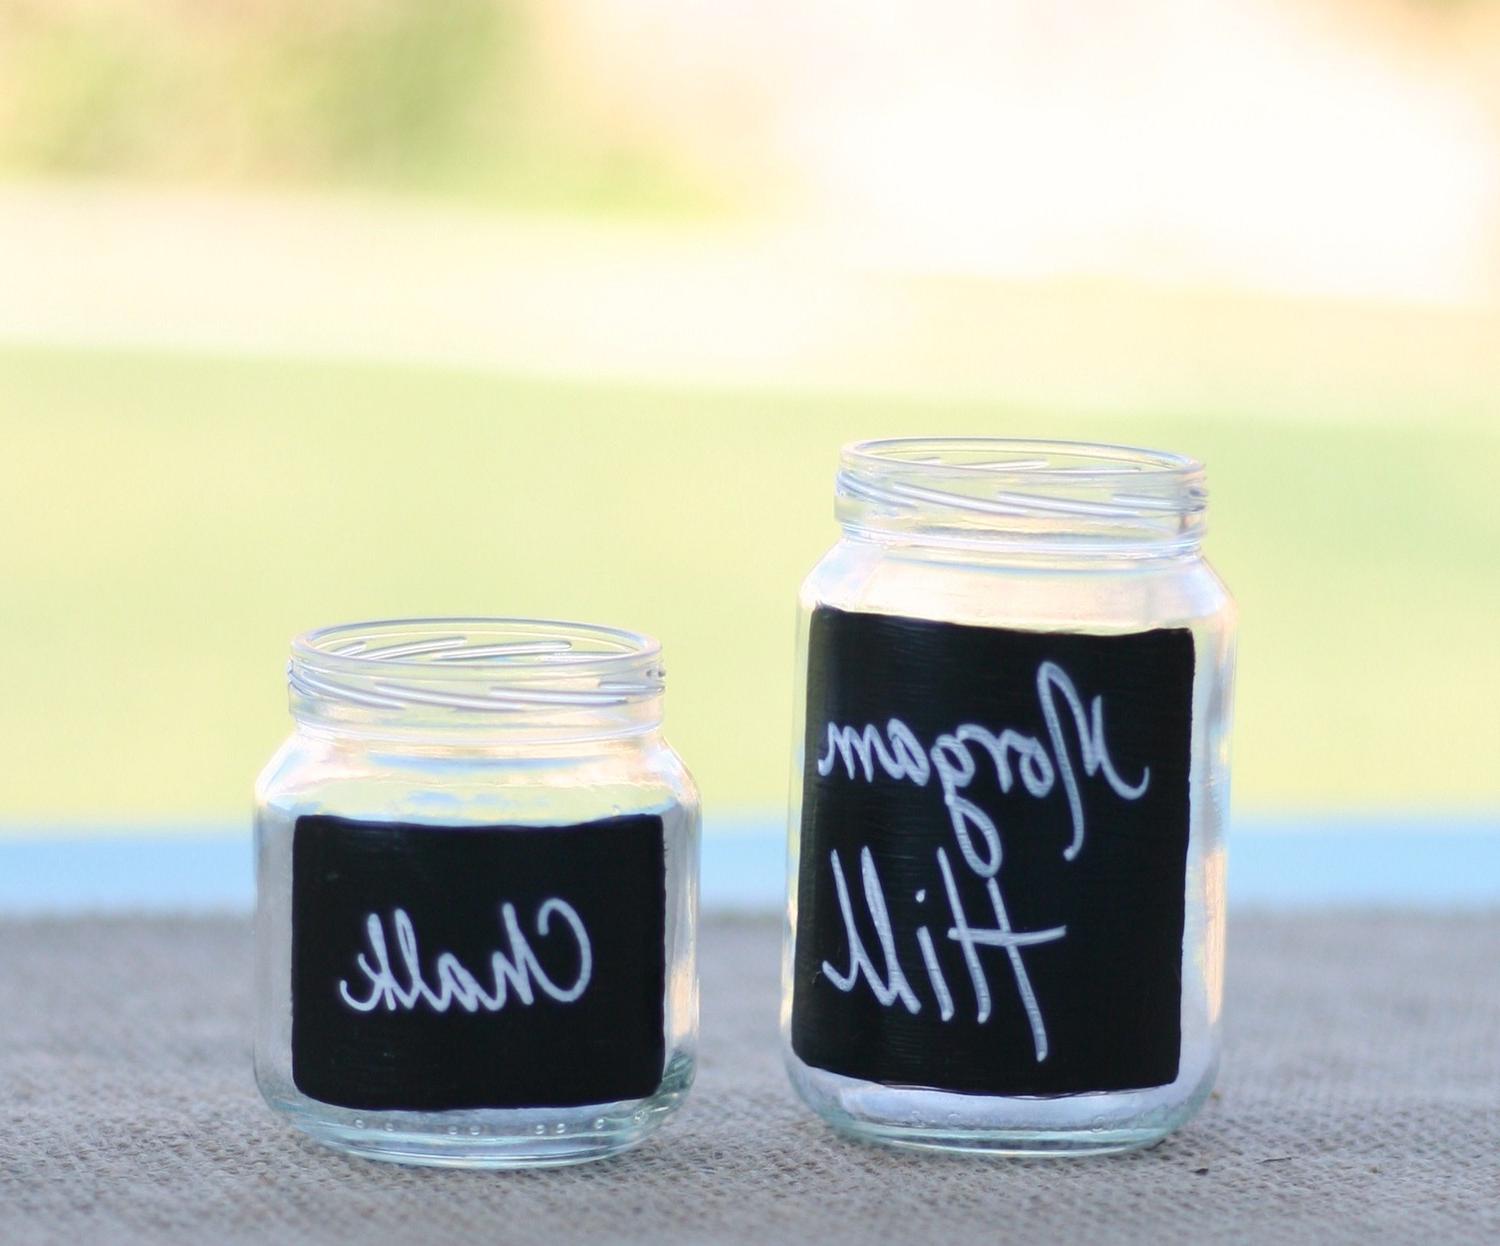 SET of 100 Wedding Place Name Escort Cards Upcycled Glass Jars With